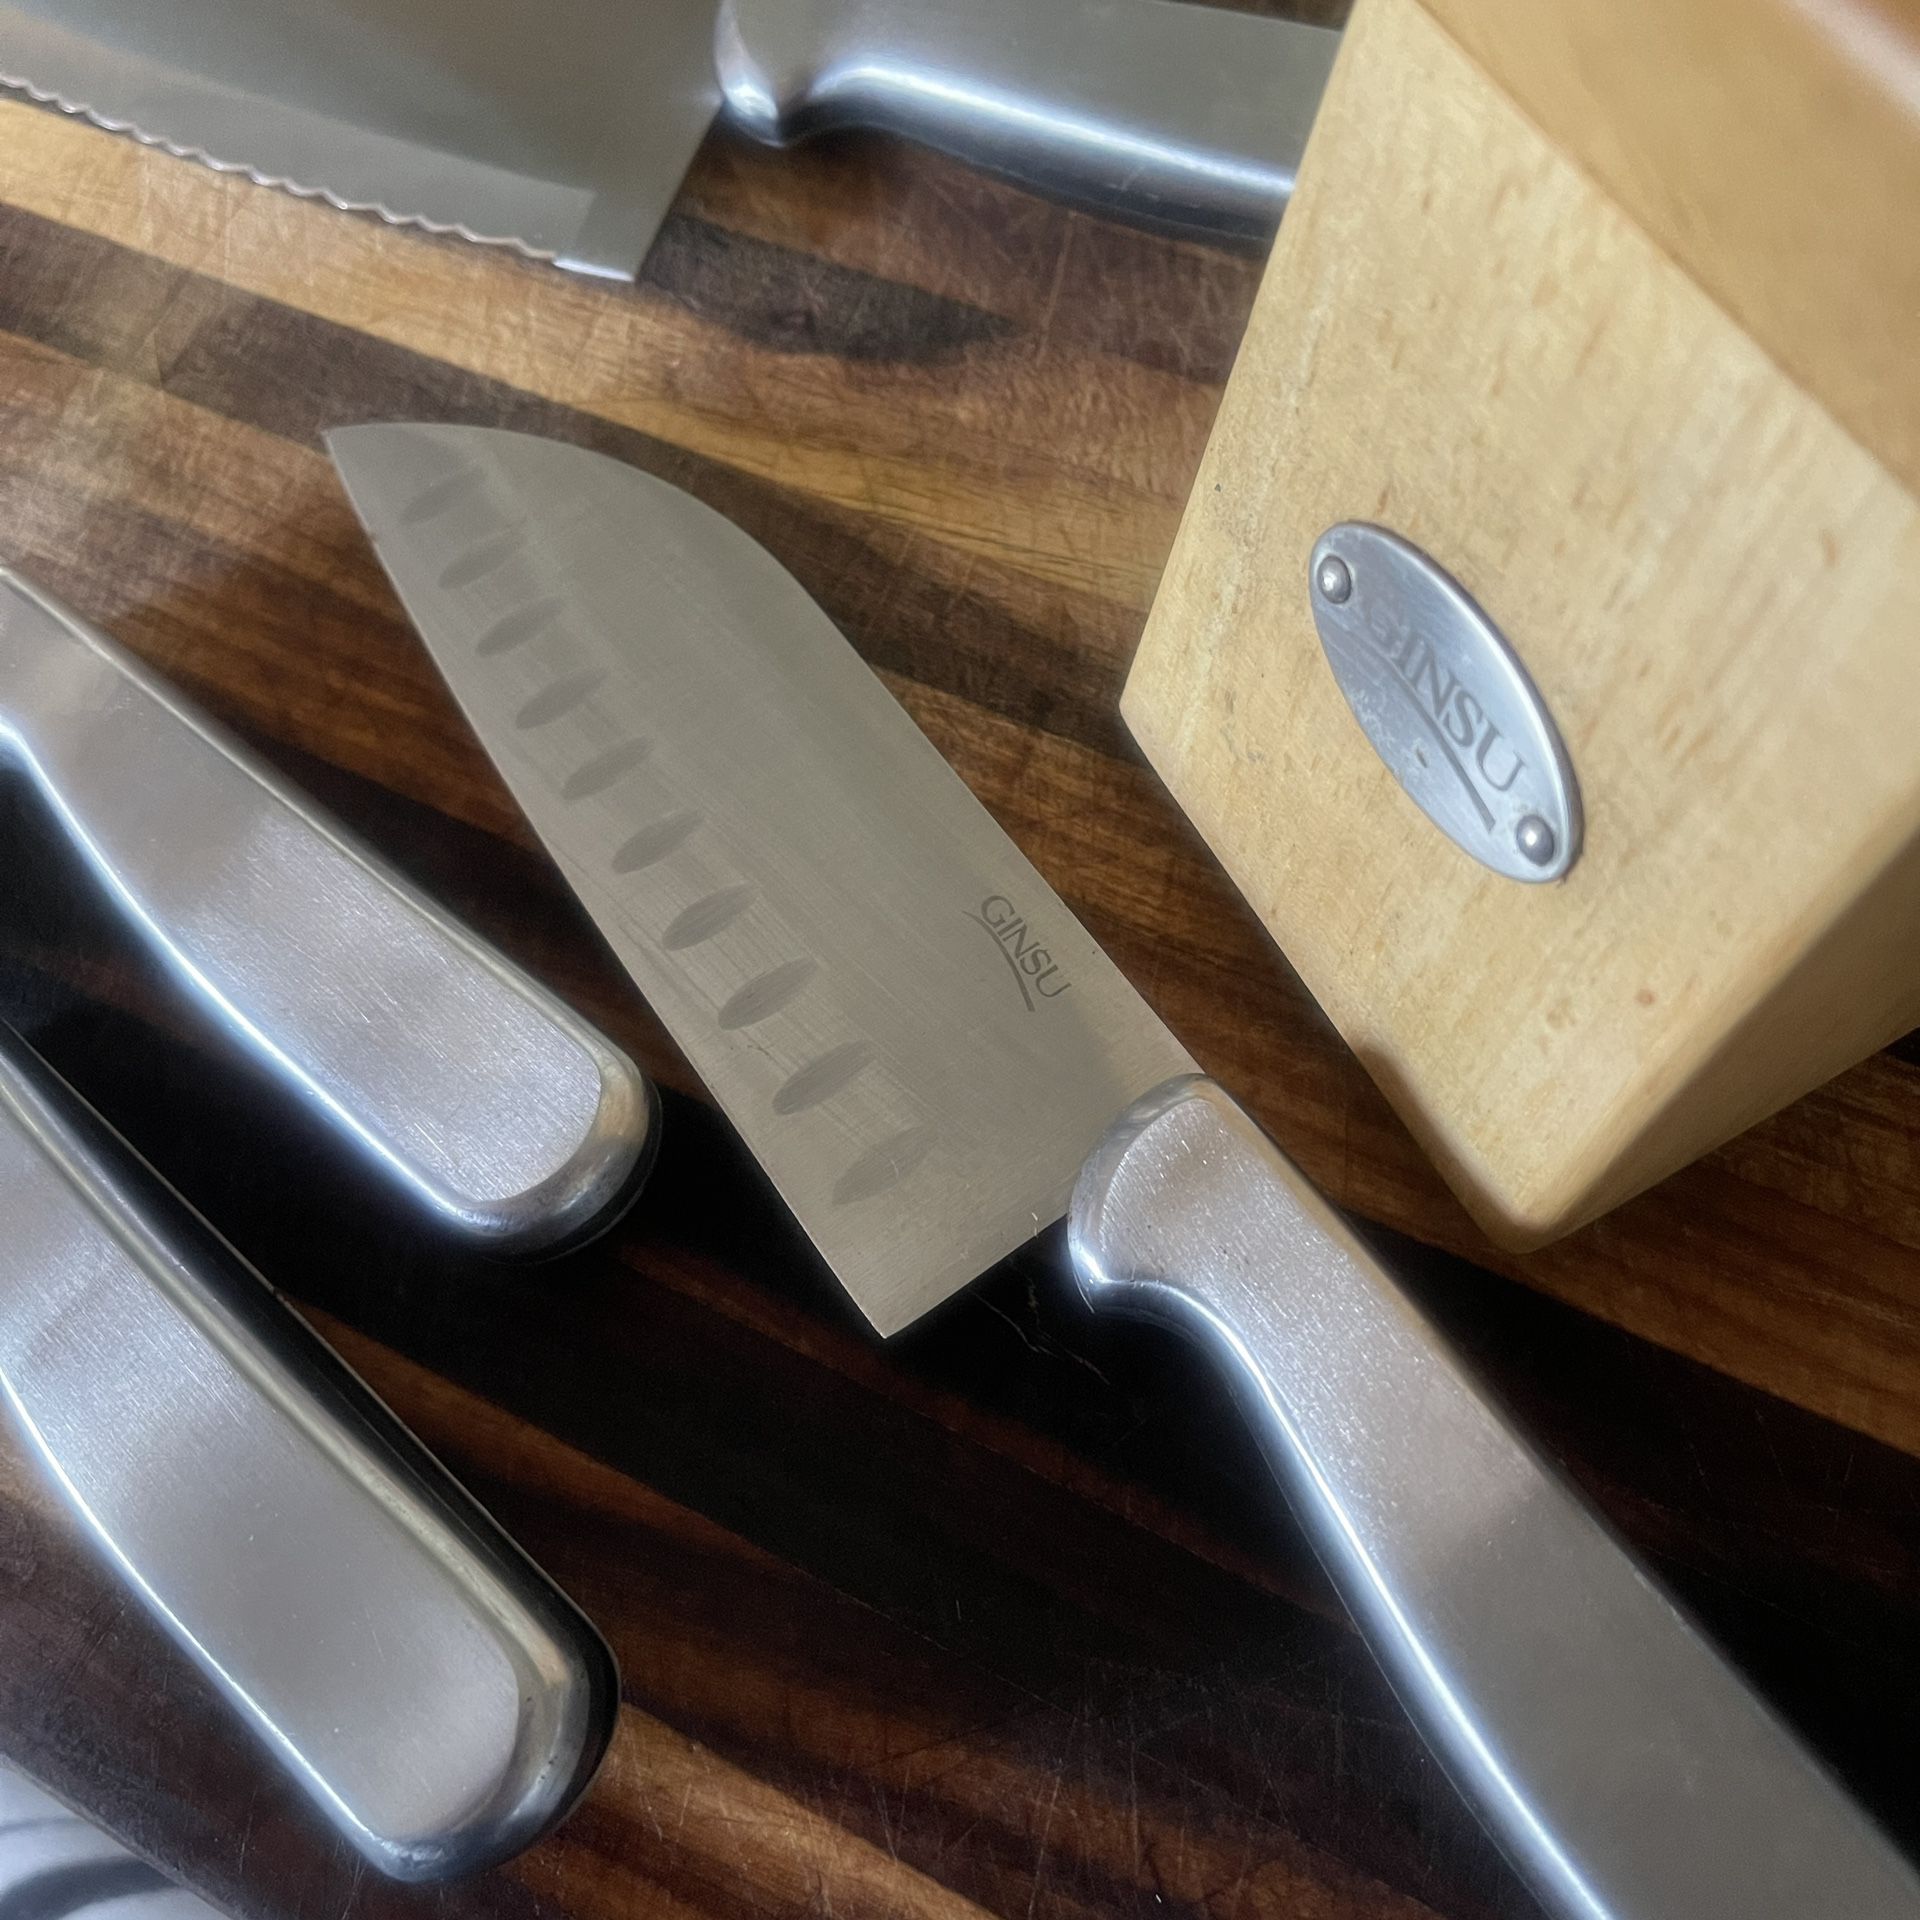 Ginsu Stainless Steel Knife Set $10 for Sale in Sterling, VA - OfferUp